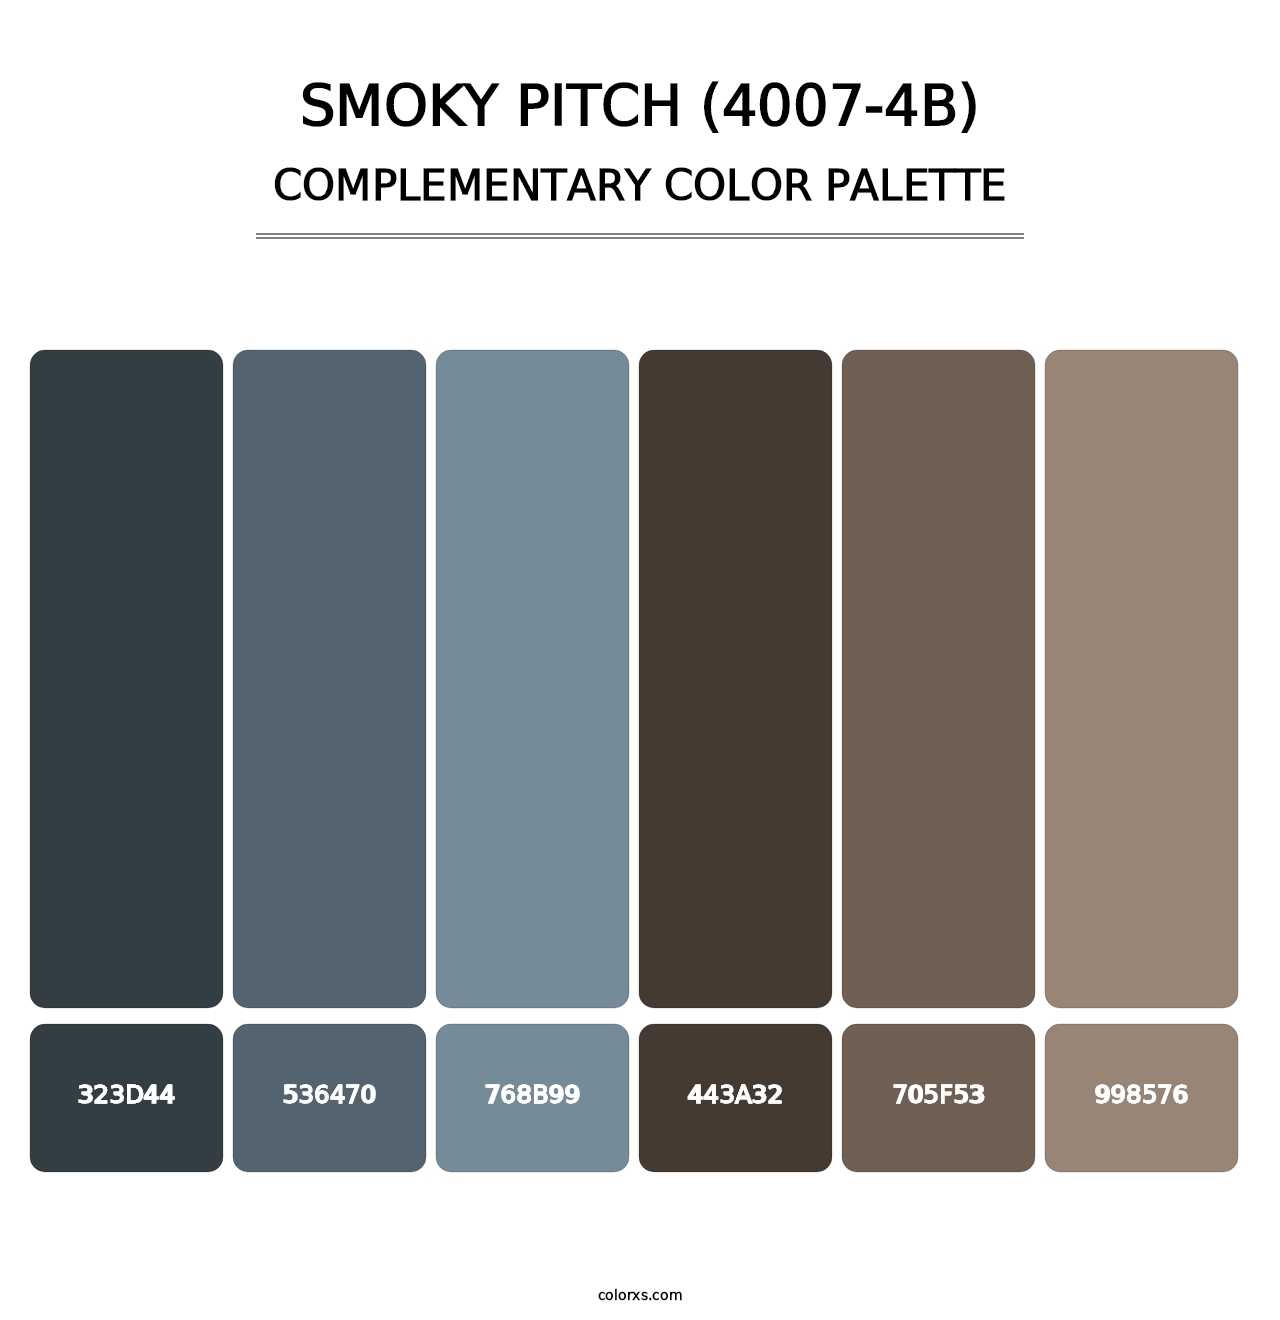 Smoky Pitch (4007-4B) - Complementary Color Palette